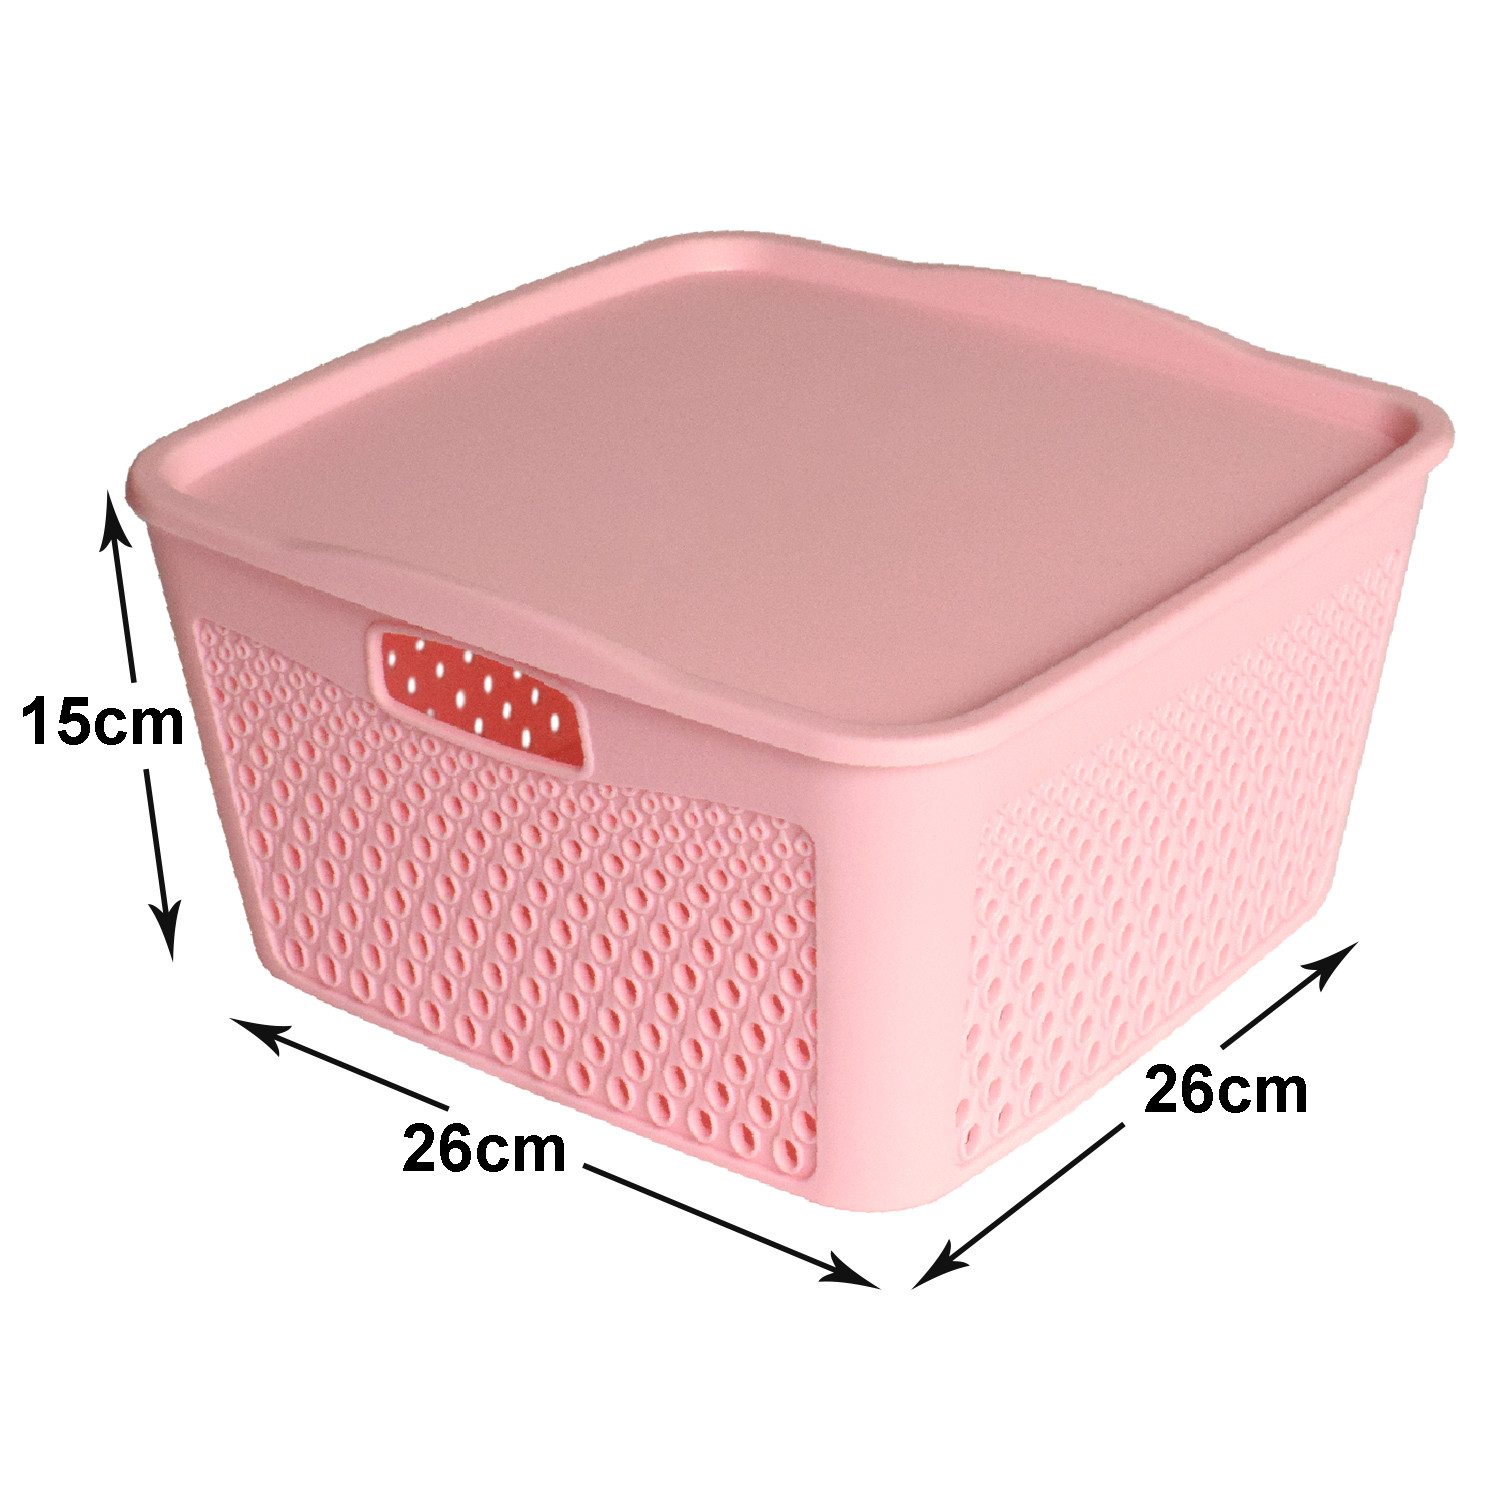 Kuber Industries Netted Design Unbreakable Multipurpose Square Shape Plastic Storage Baskets with lid Large (Pink)